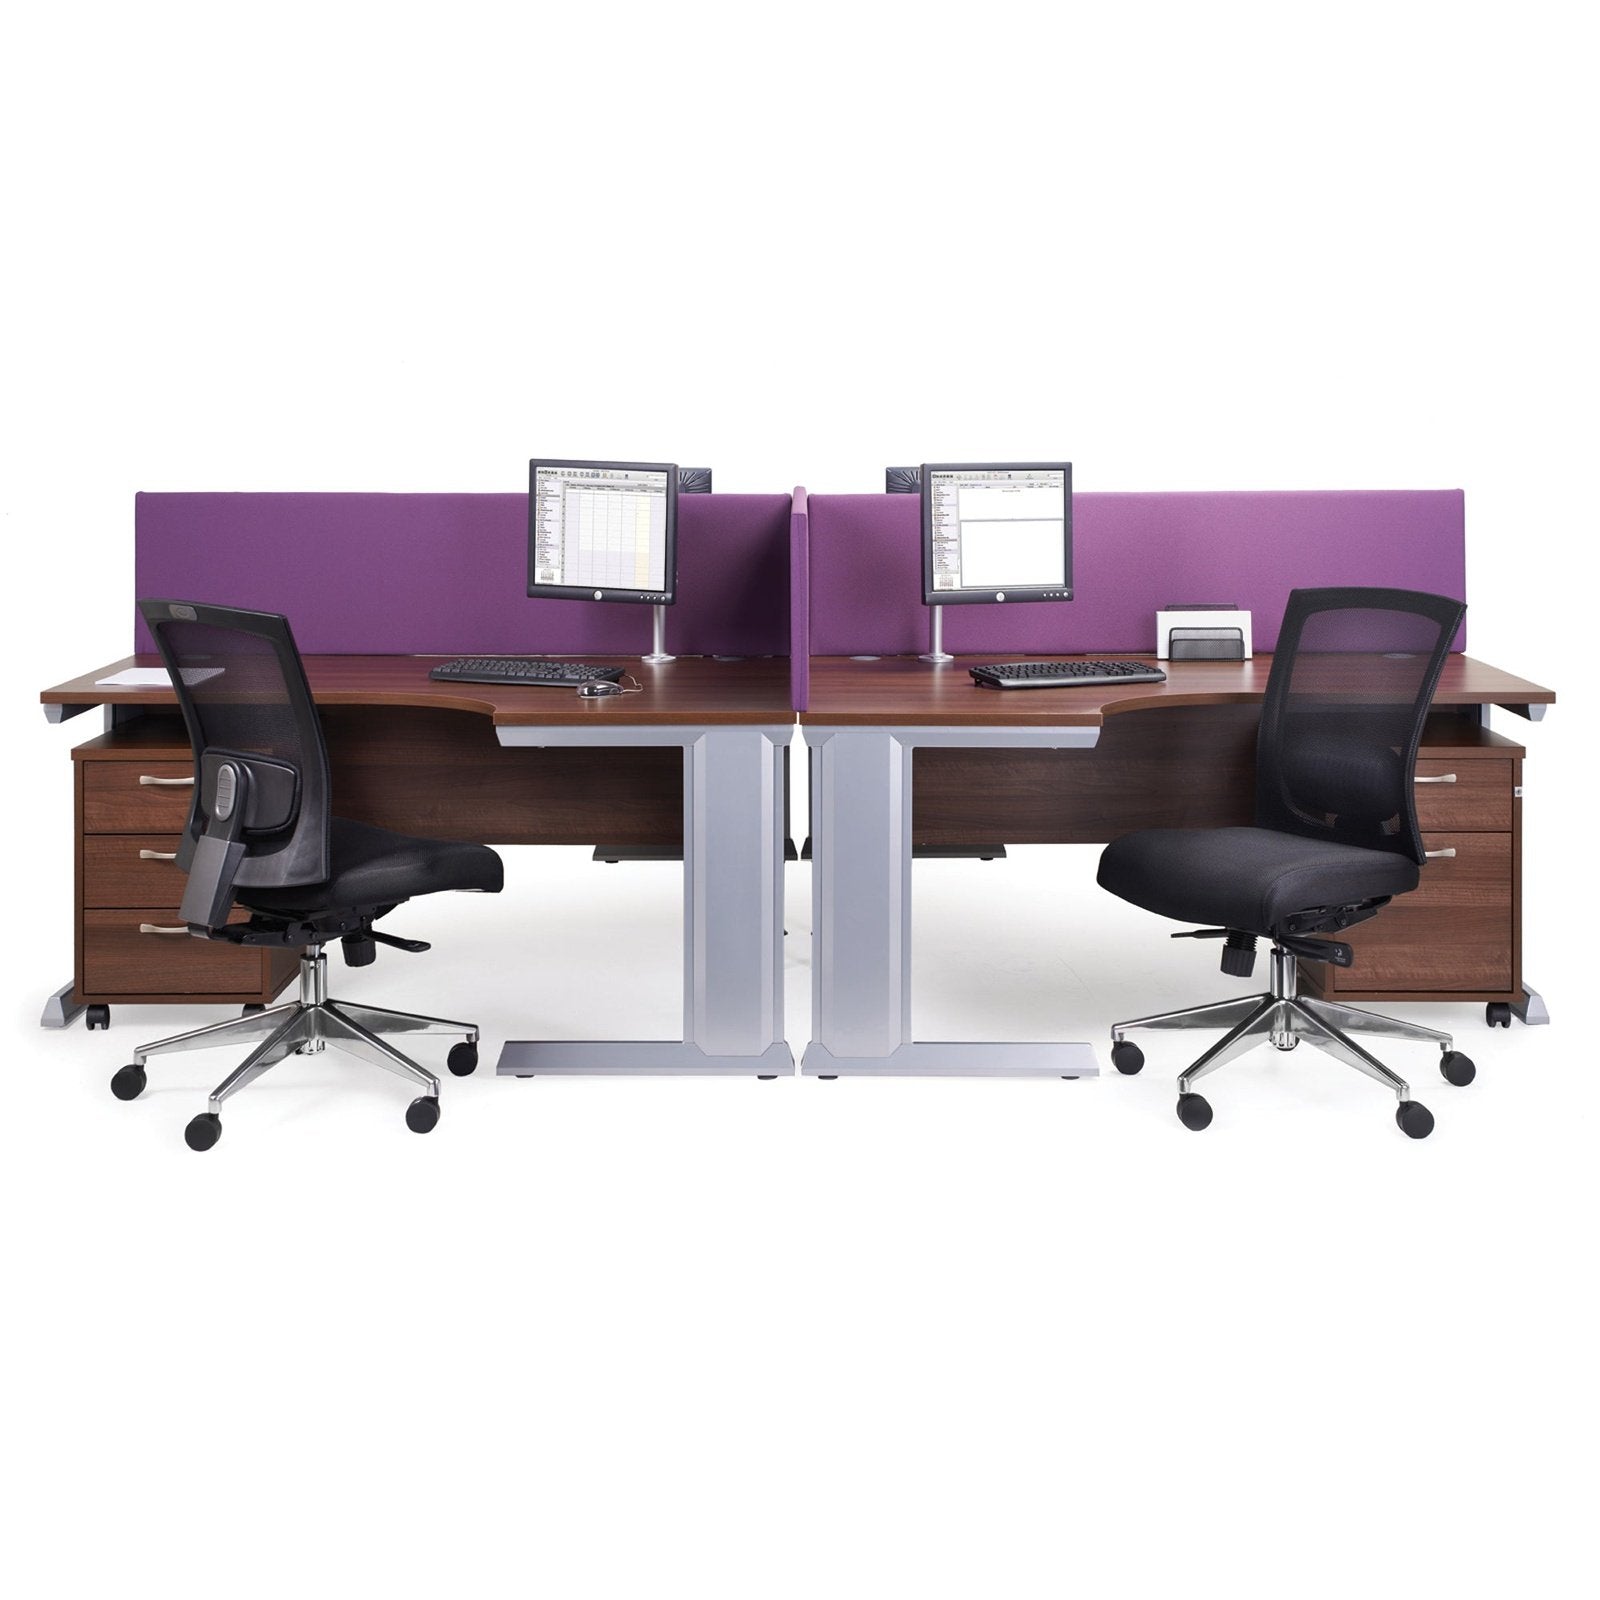 Vivo straight desk 600 deep - Office Products Online